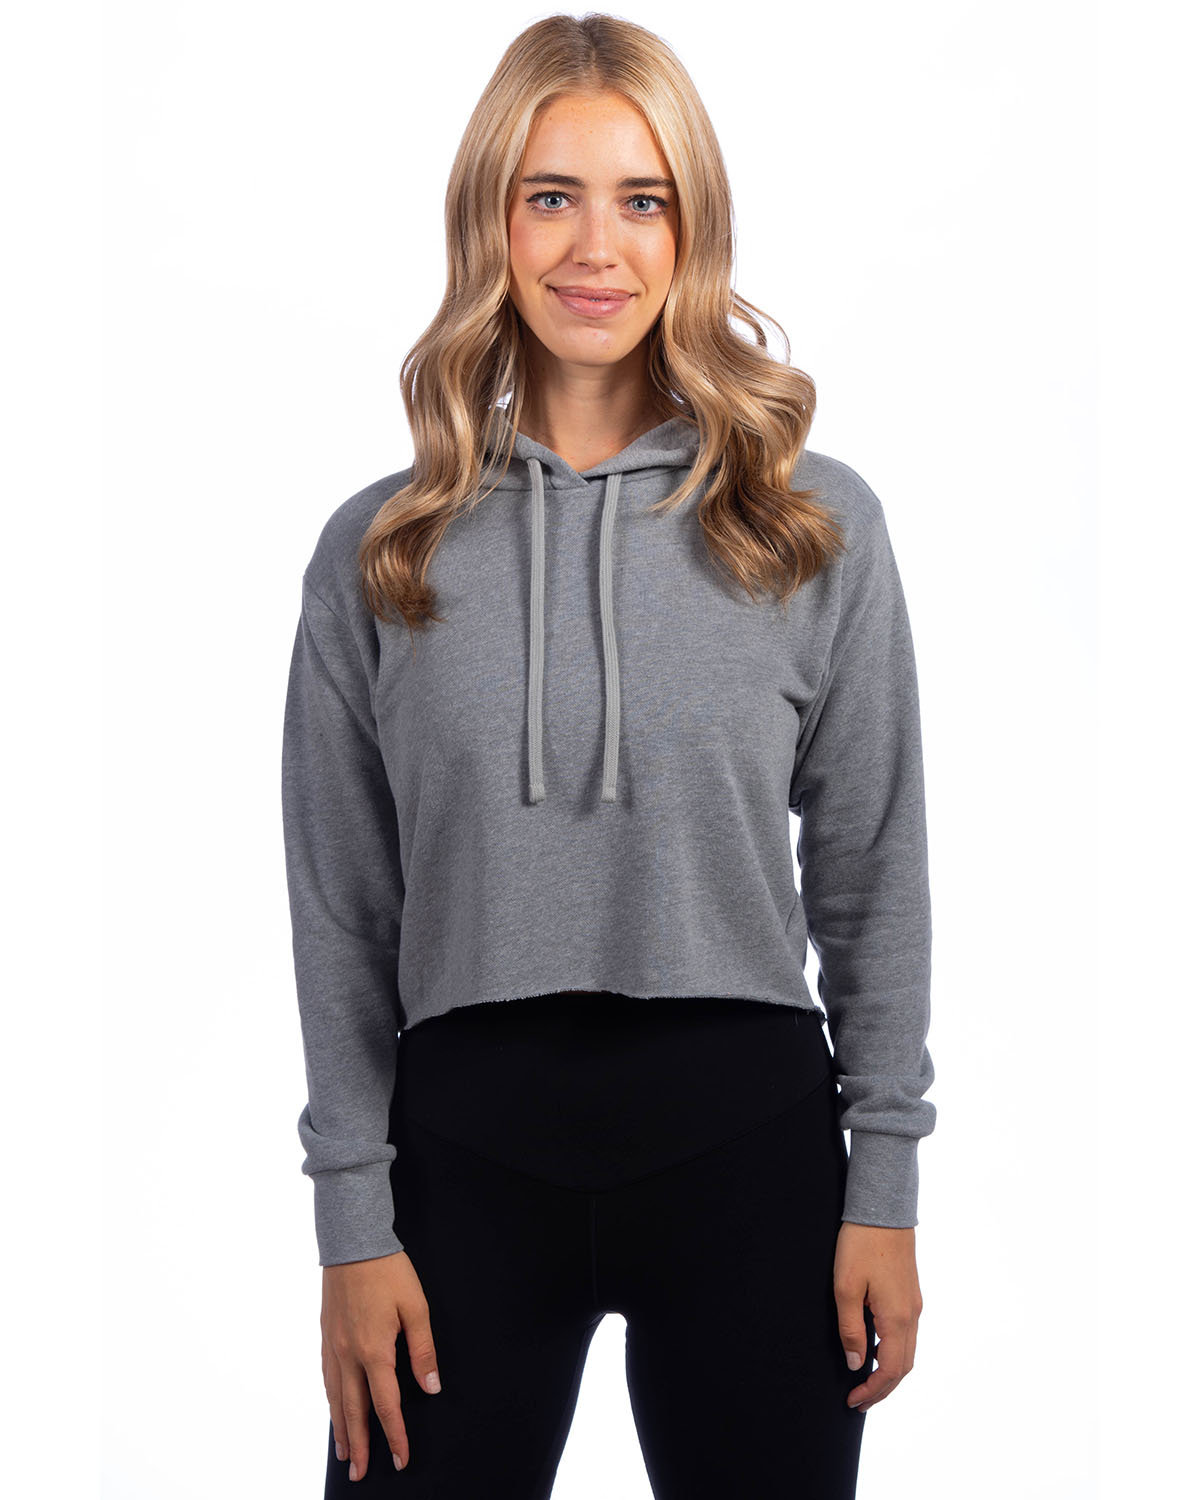 Next Level Ladies' Cropped Pullover Hooded Sweatshirt HEATHER GRAY 